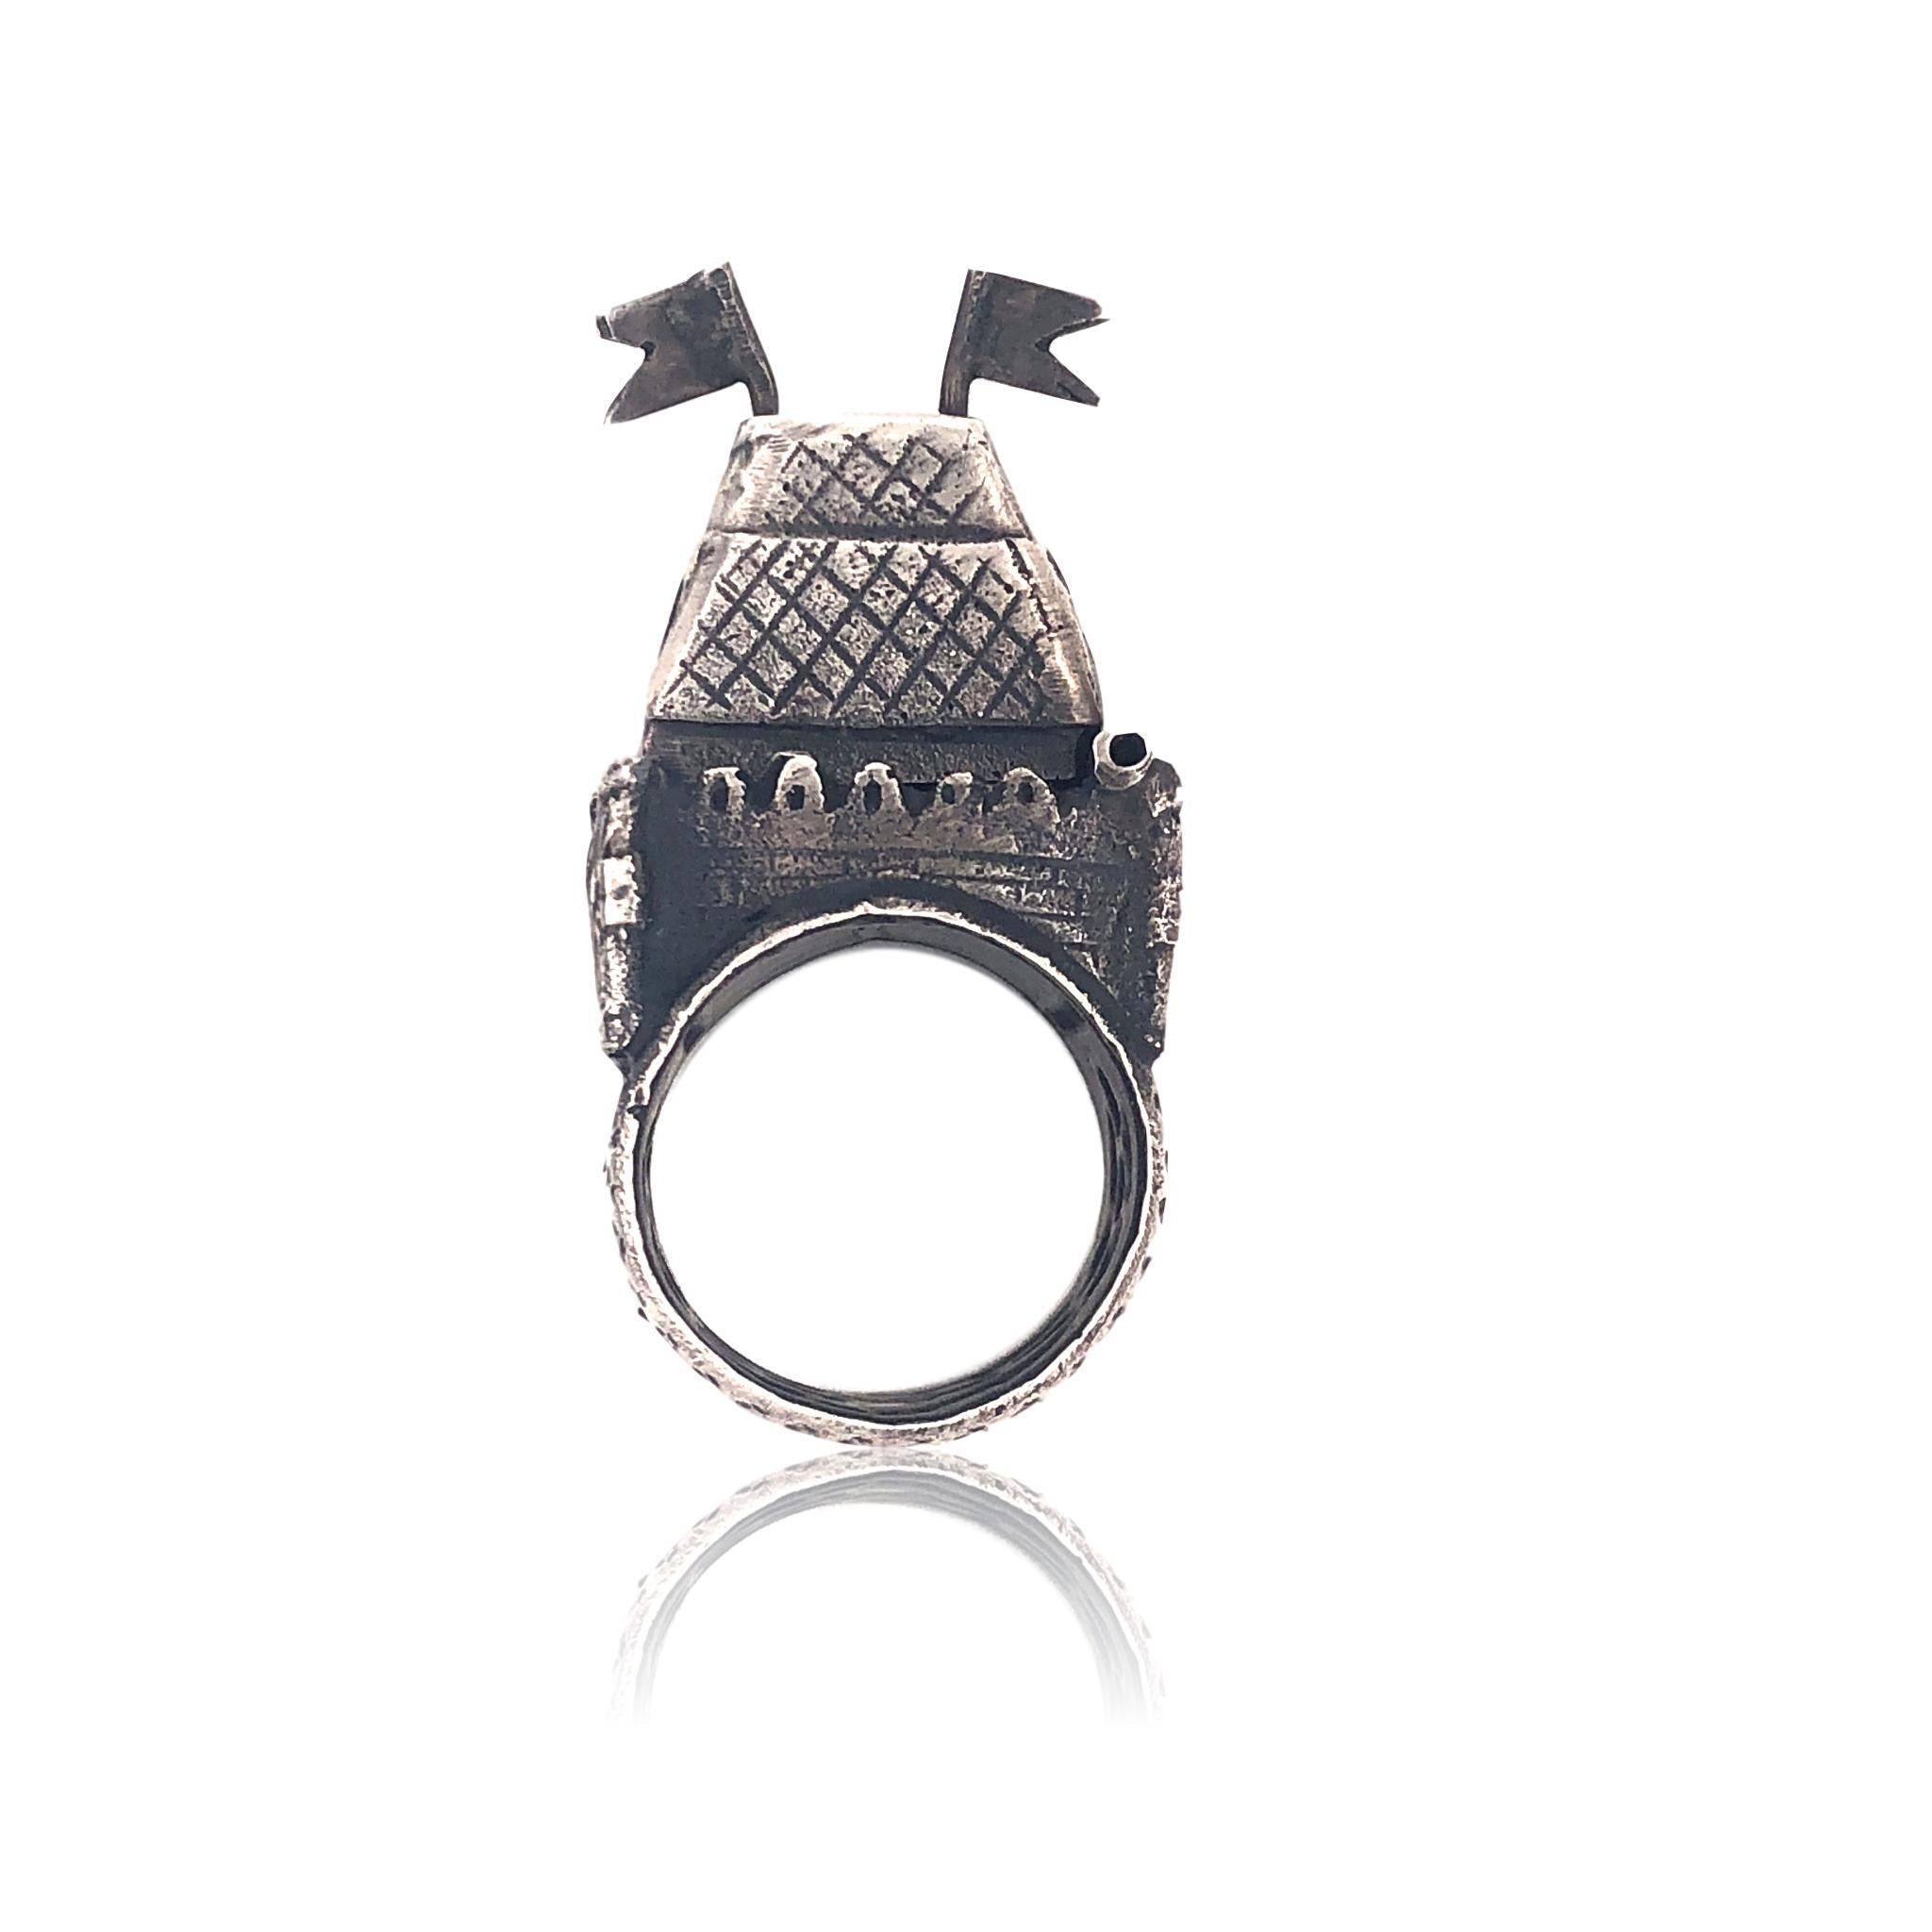 Silver Jewish Betrothal ring. The 1 